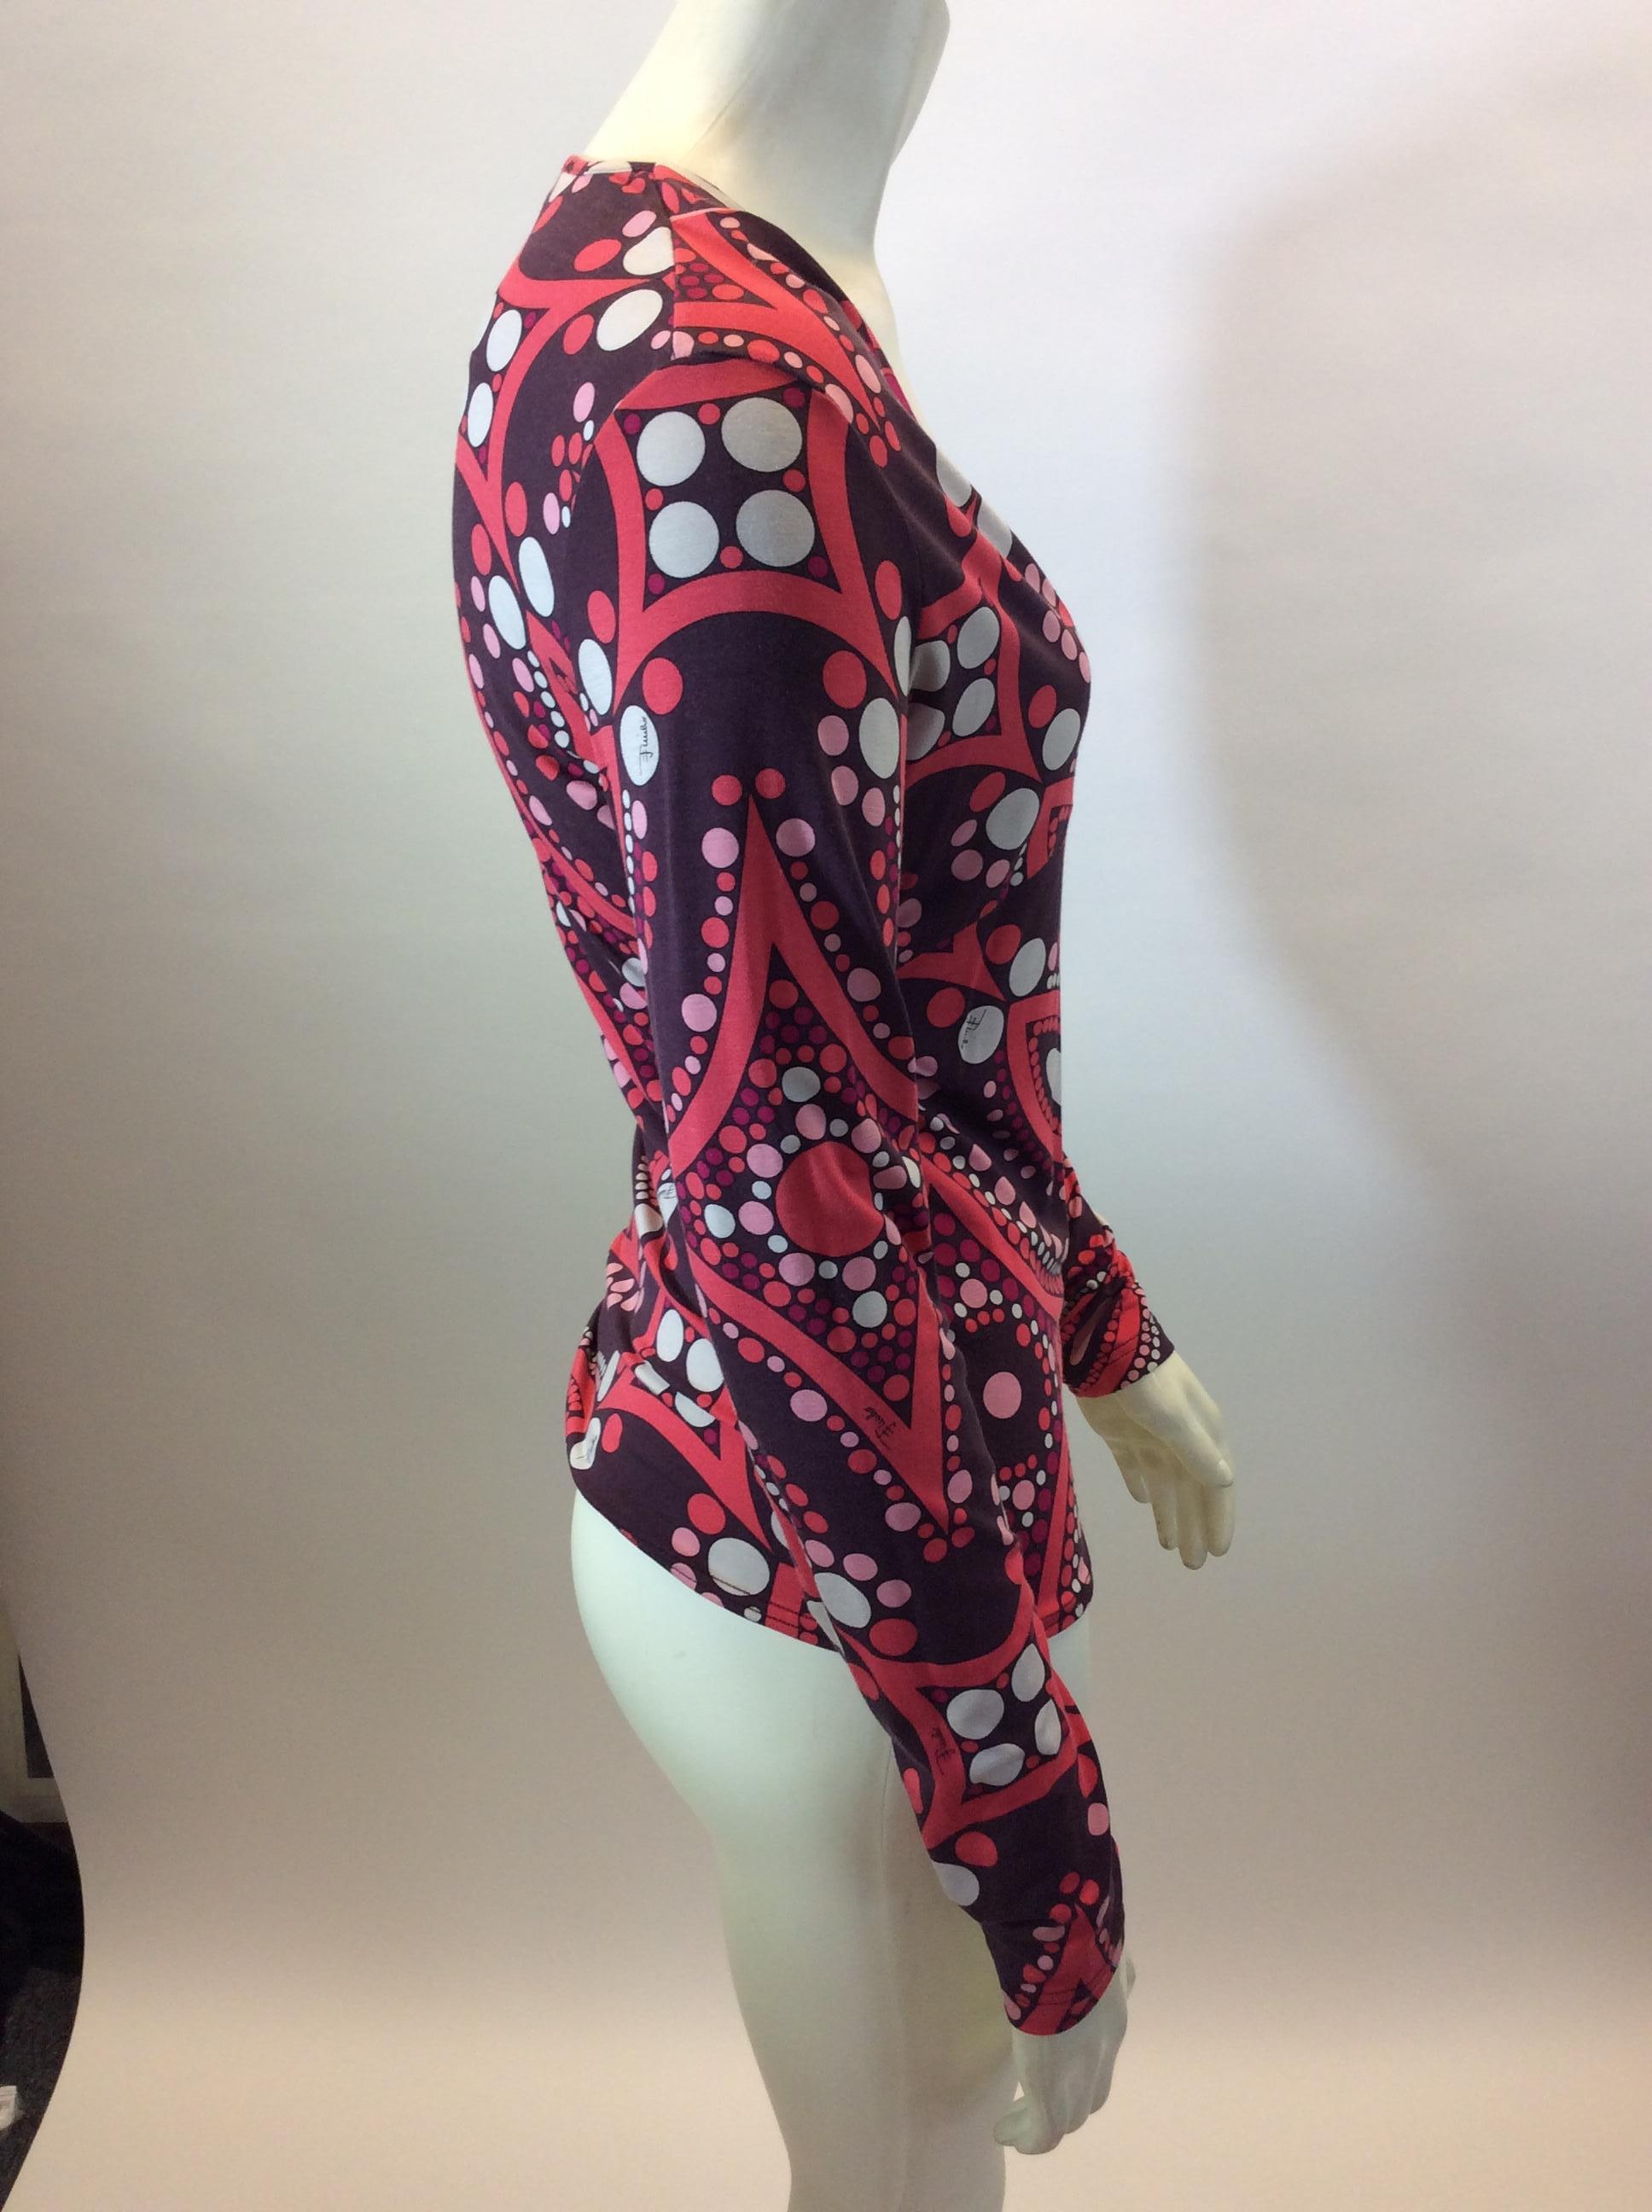 Emilio Pucci Print Long Sleeve Shirt In Good Condition For Sale In Narberth, PA